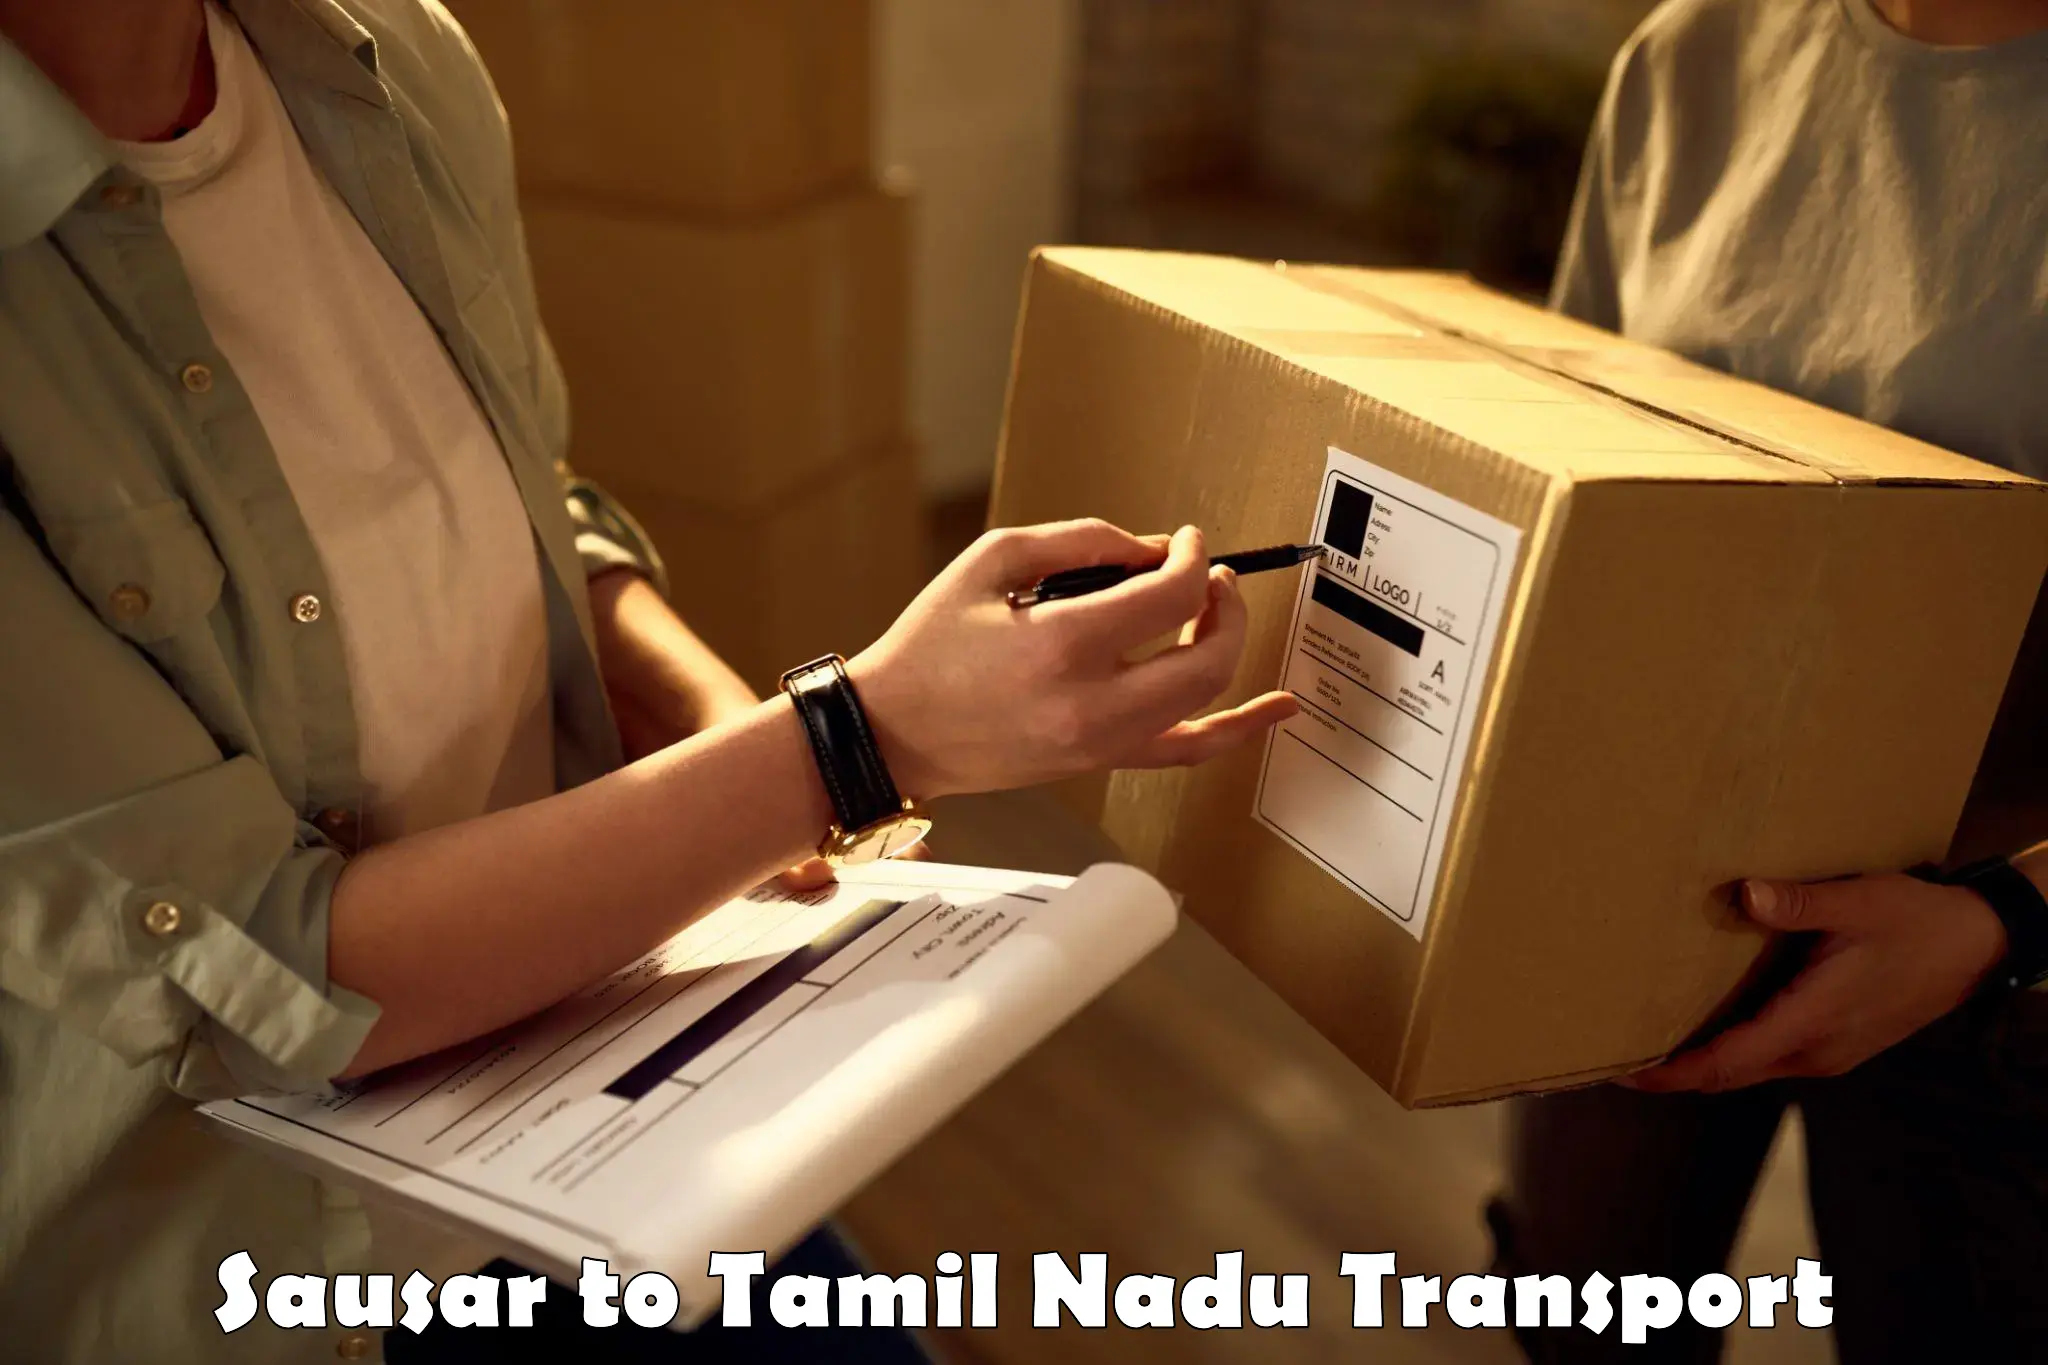 Road transport online services Sausar to Shanmugha Arts Science Technology and Research Academy Thanjavur